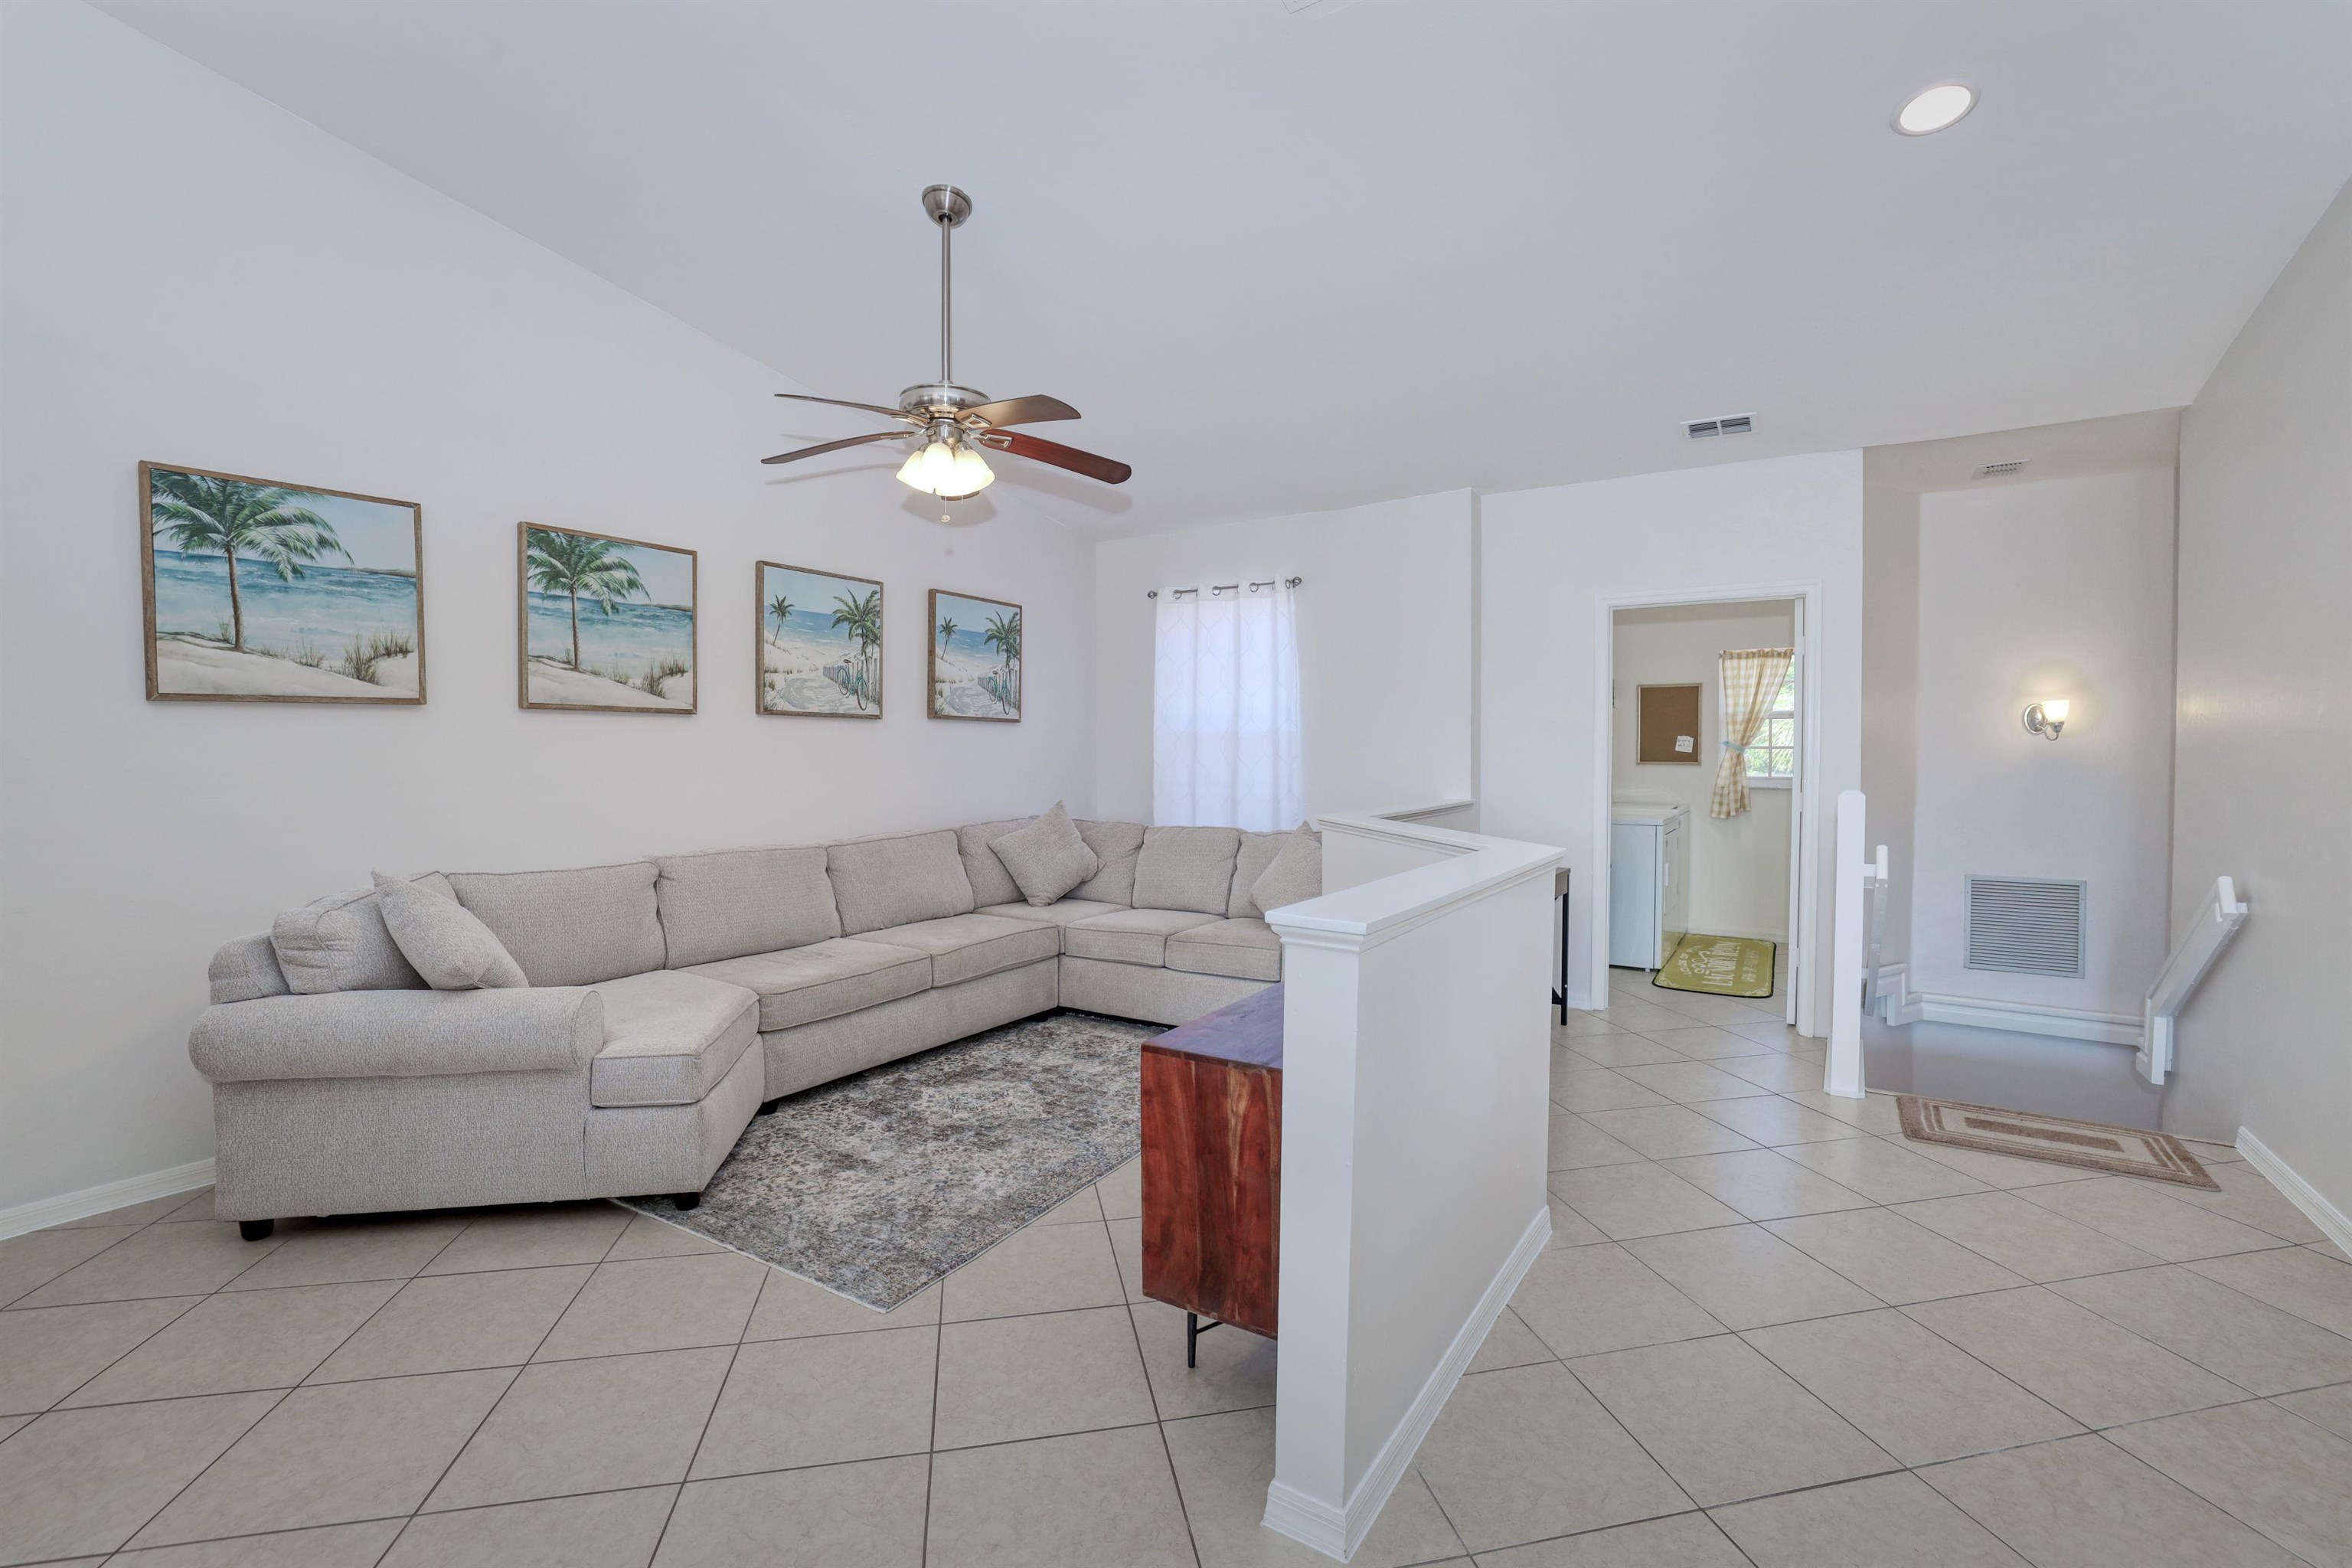 13831 Eagle Ridge Lakes Dr, Fort Myers, Florida 33912, 2 Bedrooms Bedrooms, ,2 BathroomsBathrooms,Condo,For Sale,Eagle Ridge Lakes Dr,2230896